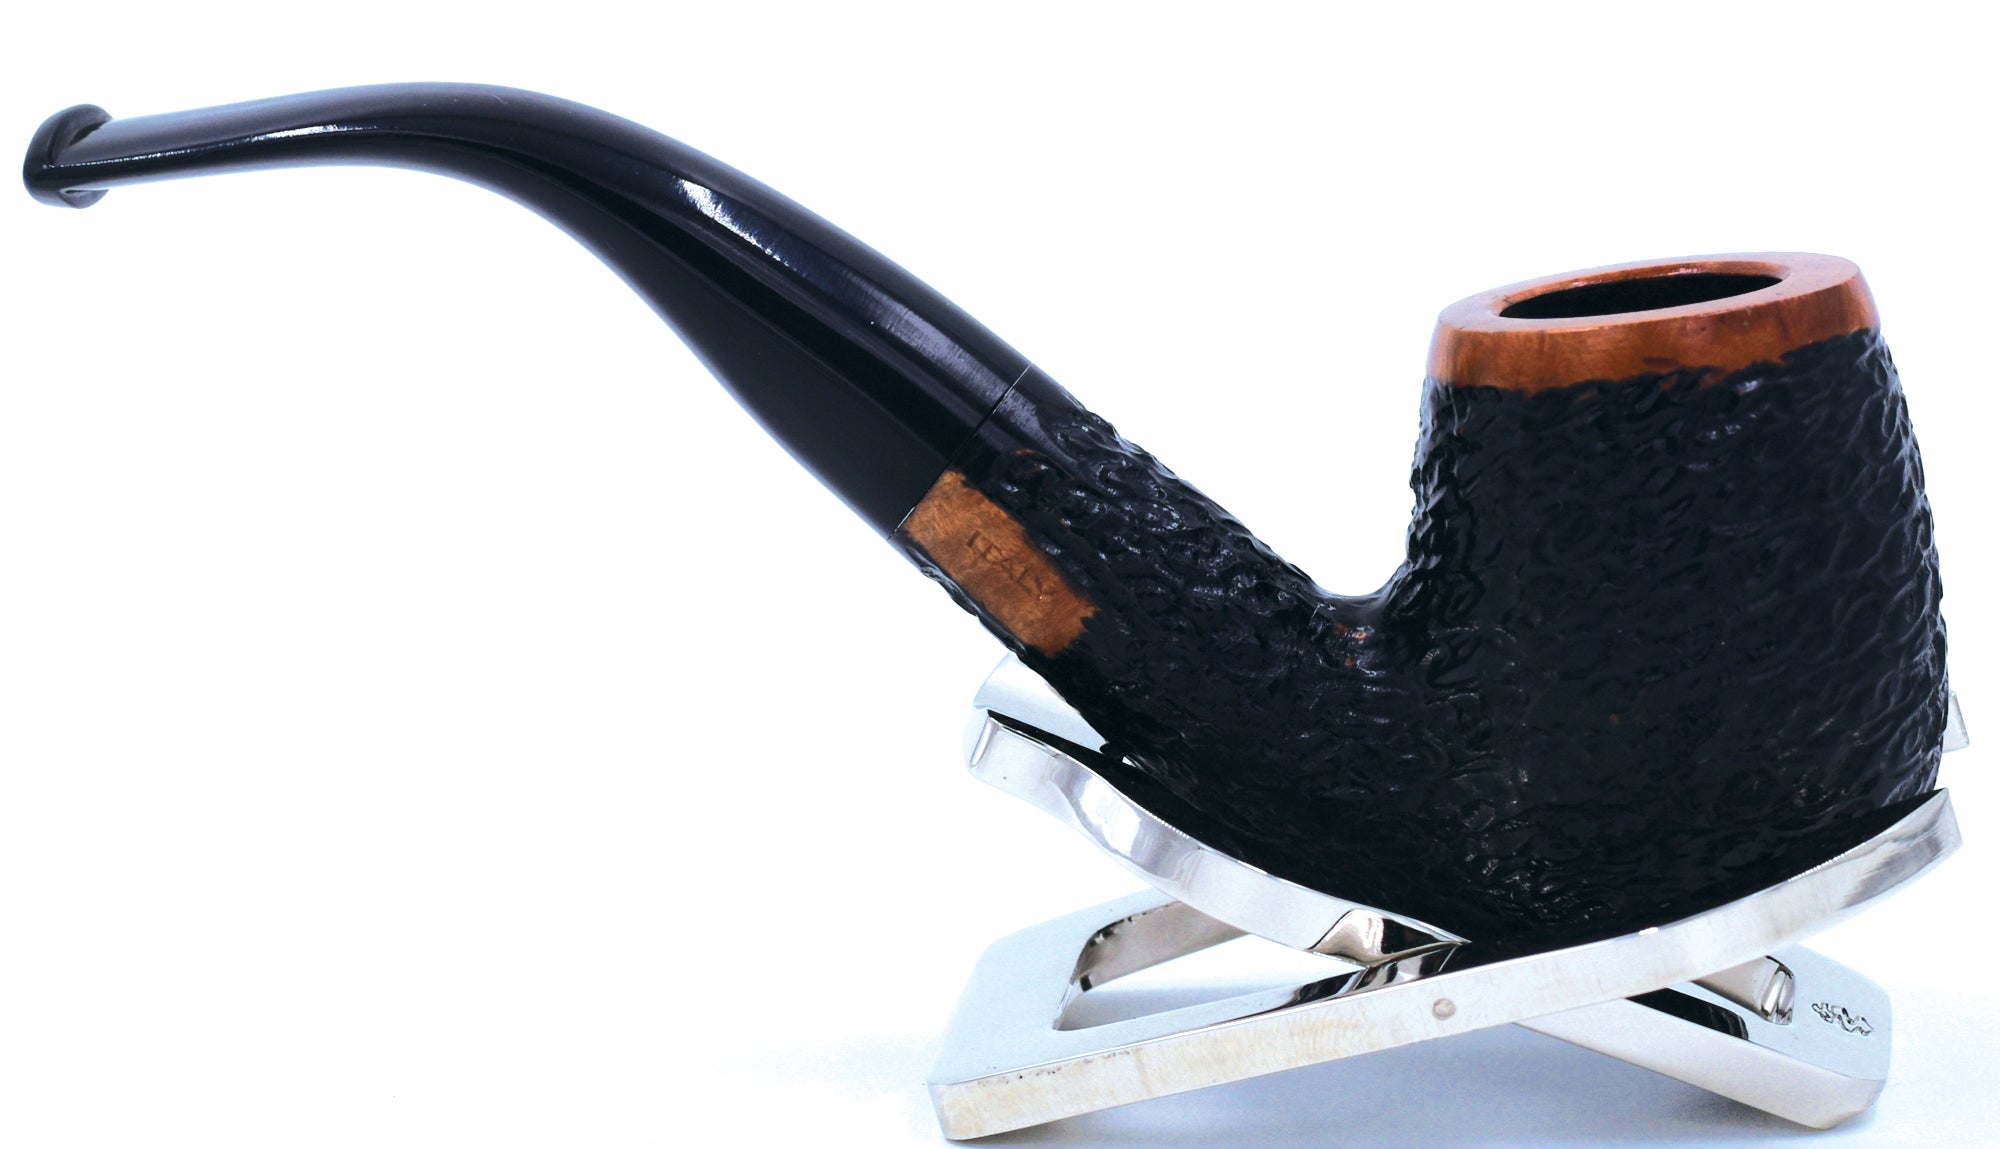 LEGENDEX® TOSCANINI* 9 MM Filtered Briar Smoking Pipe Made In Italy 01-08-402